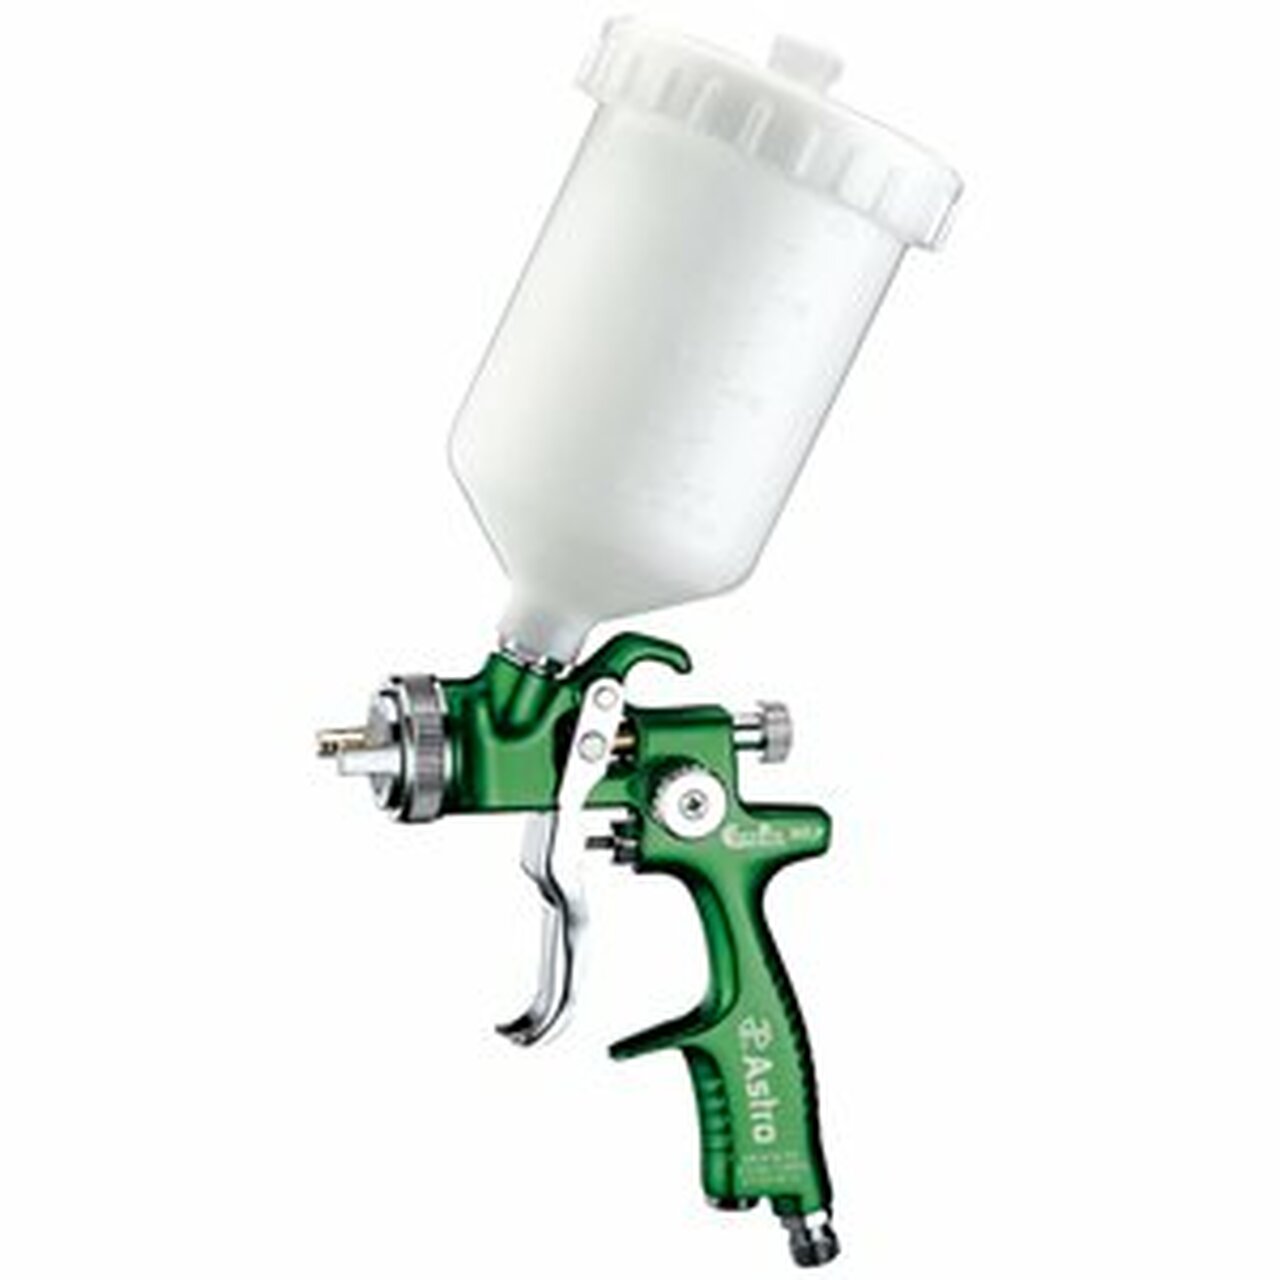 Astro Pneumatic EUROHV103 HVLP Spray Gun with 1.3 mm Nozzle | JB Tools